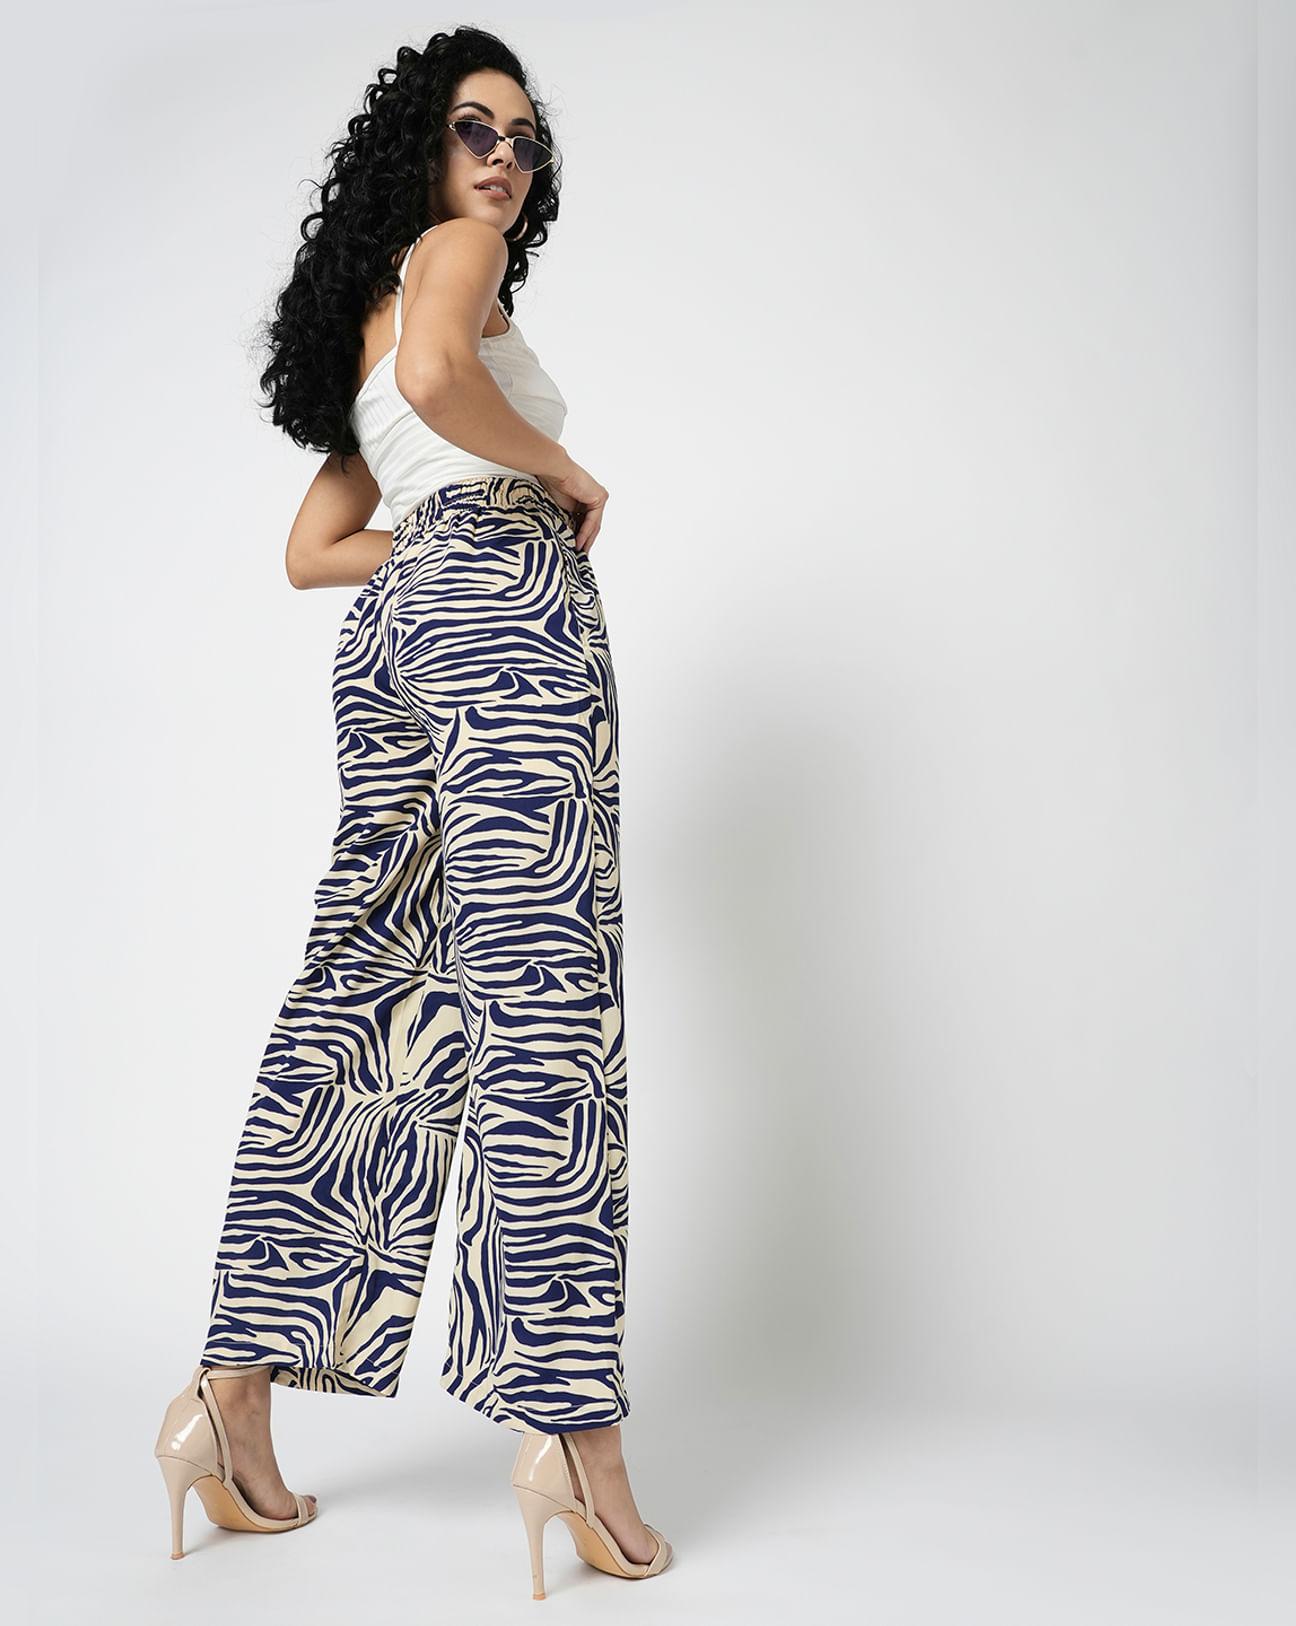 i.scenery BY VERO MODA Off-White High Rise Printed Pants